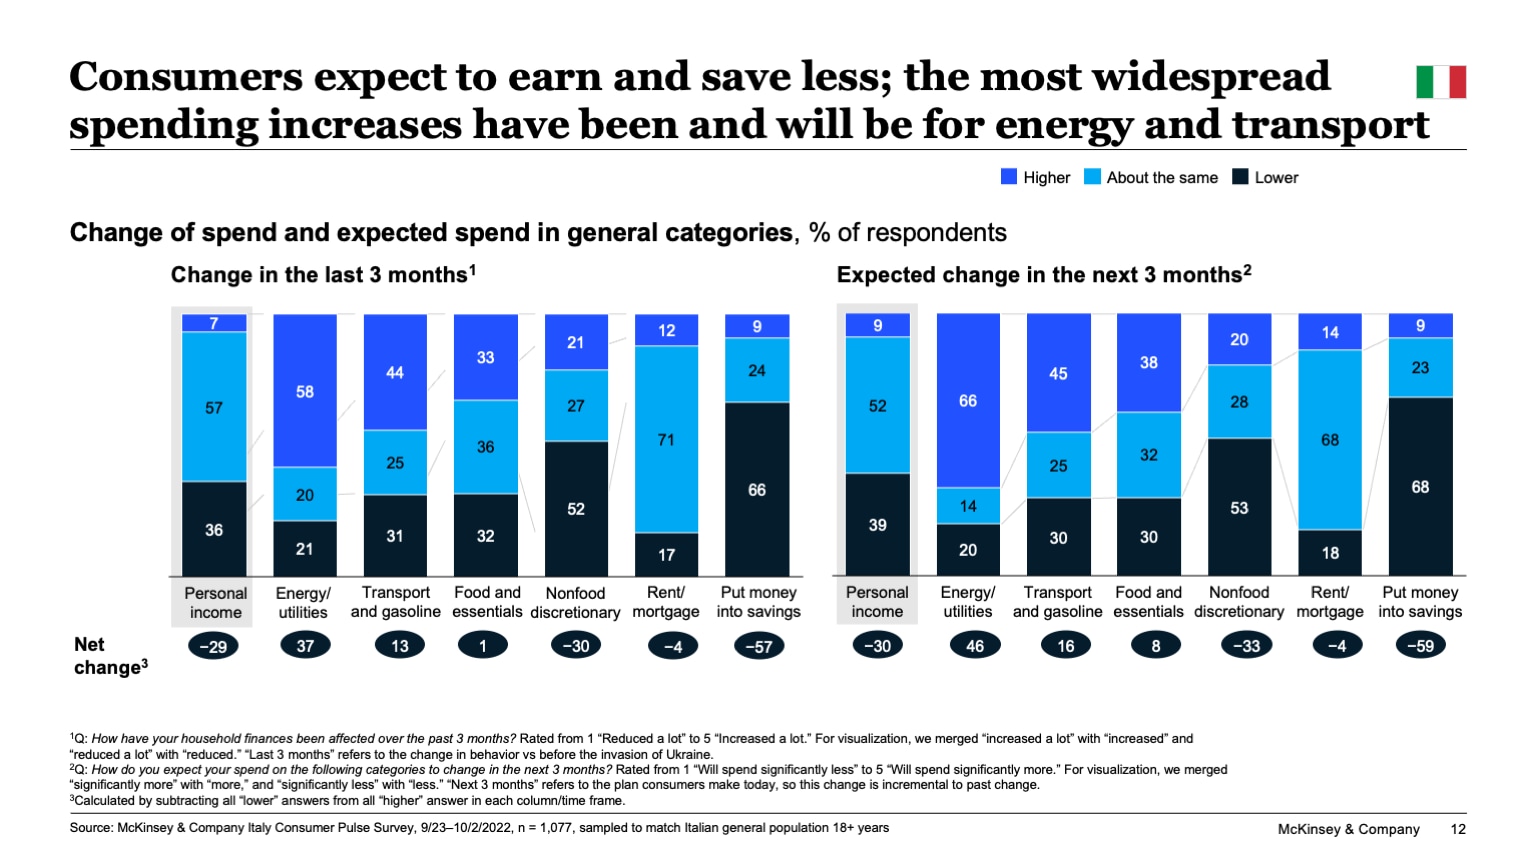 Consumers expect to earn and save less; the most widespread spending increases have been and will be for energy and transport